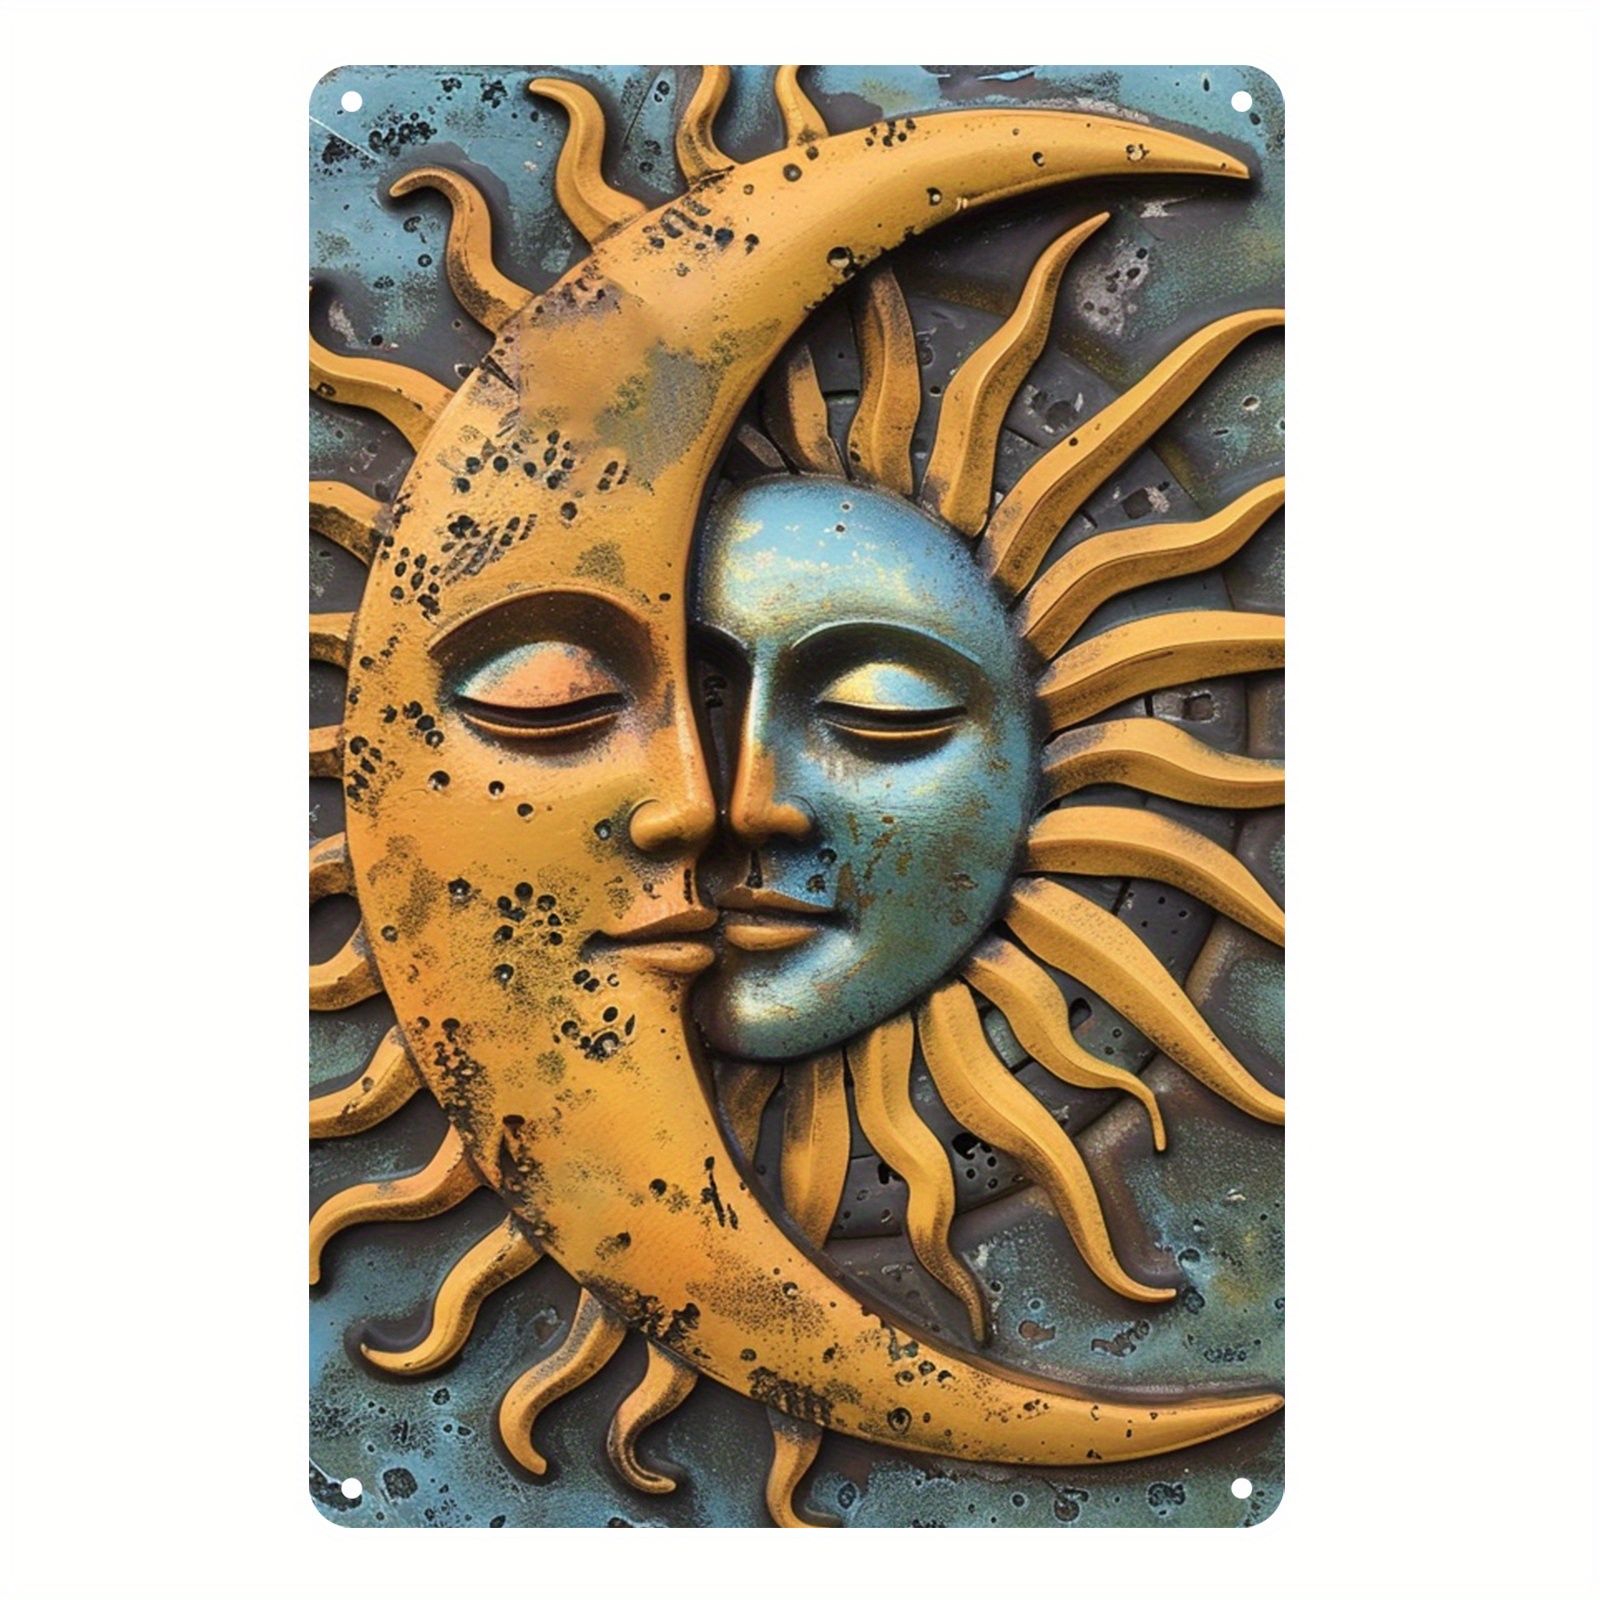 

Vintage Sun And Moon Metal Wall Art - Durable Aluminum Sign For Home & Bar Decor, 12x8 Inches